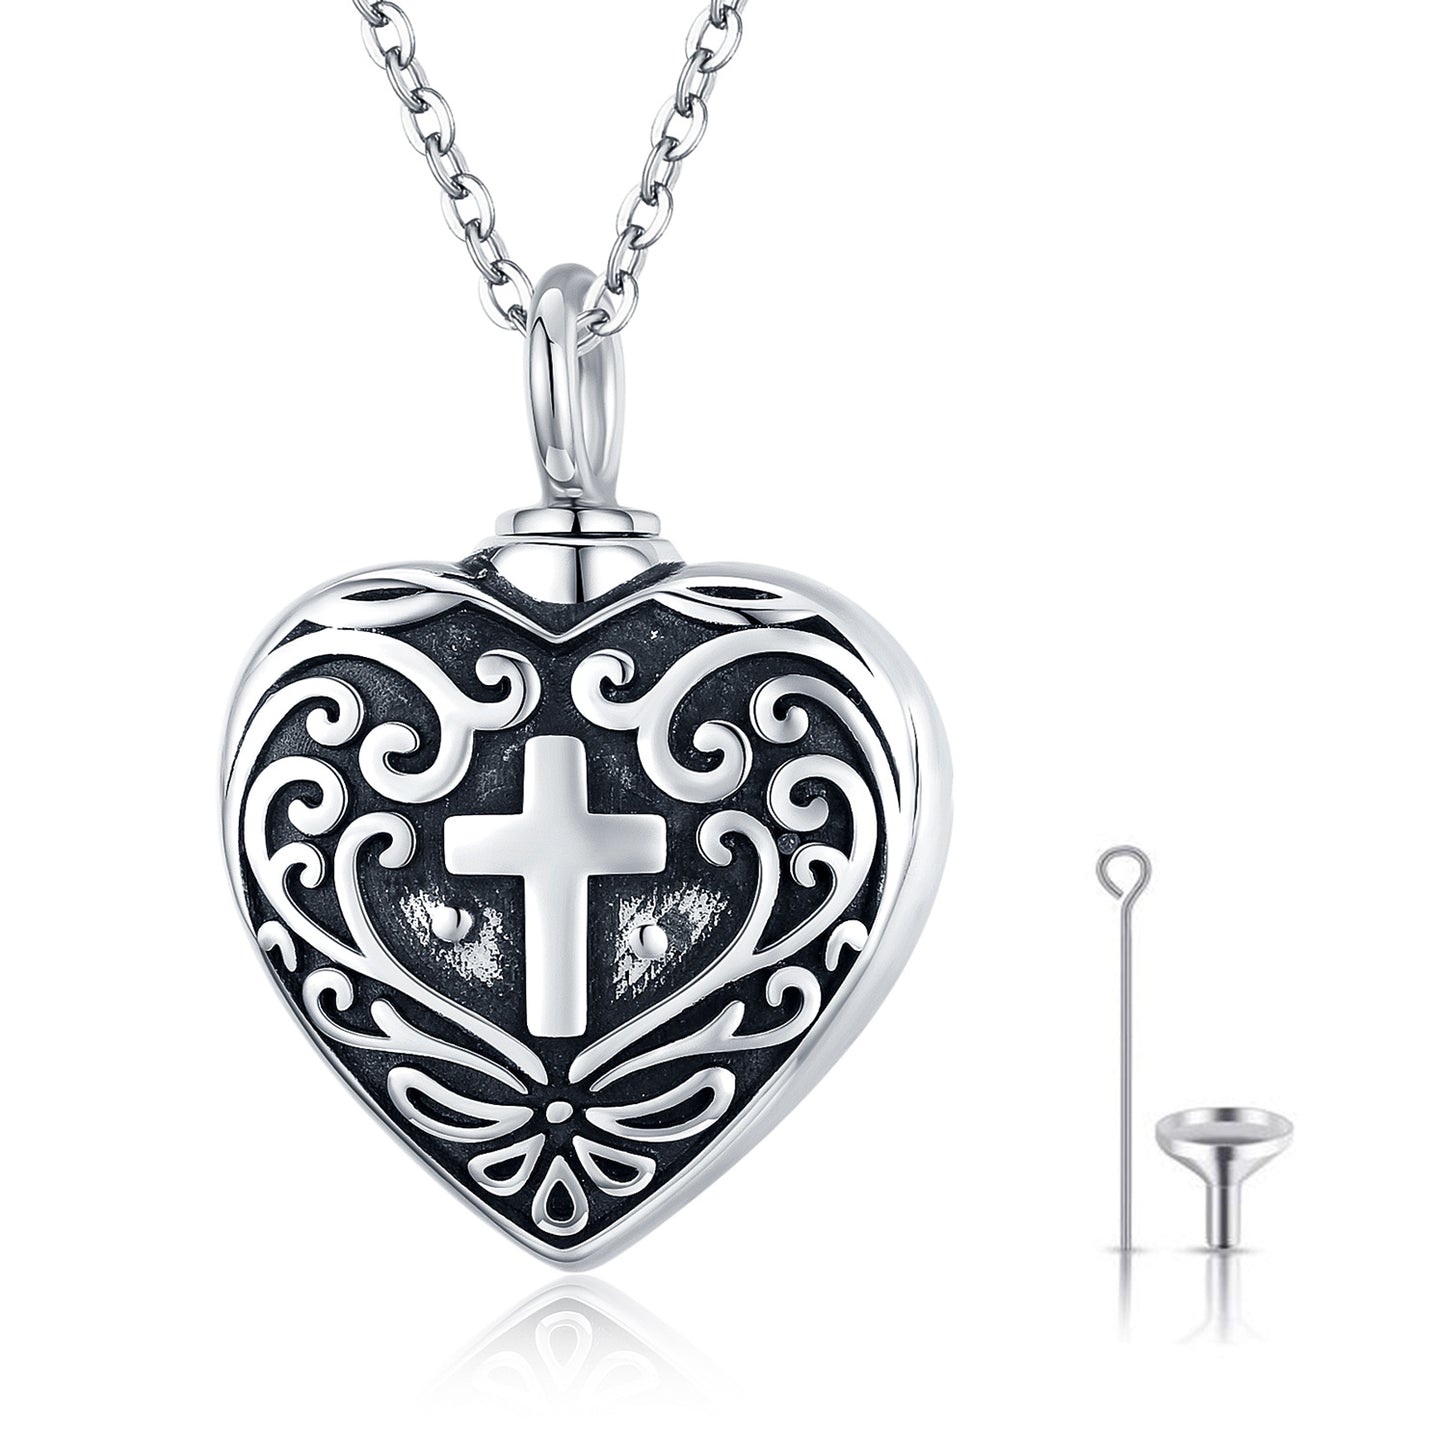 S925 Sterling Silver Cross Urn for Ashes Heart Cremation Keepsake Memorial Jewelry